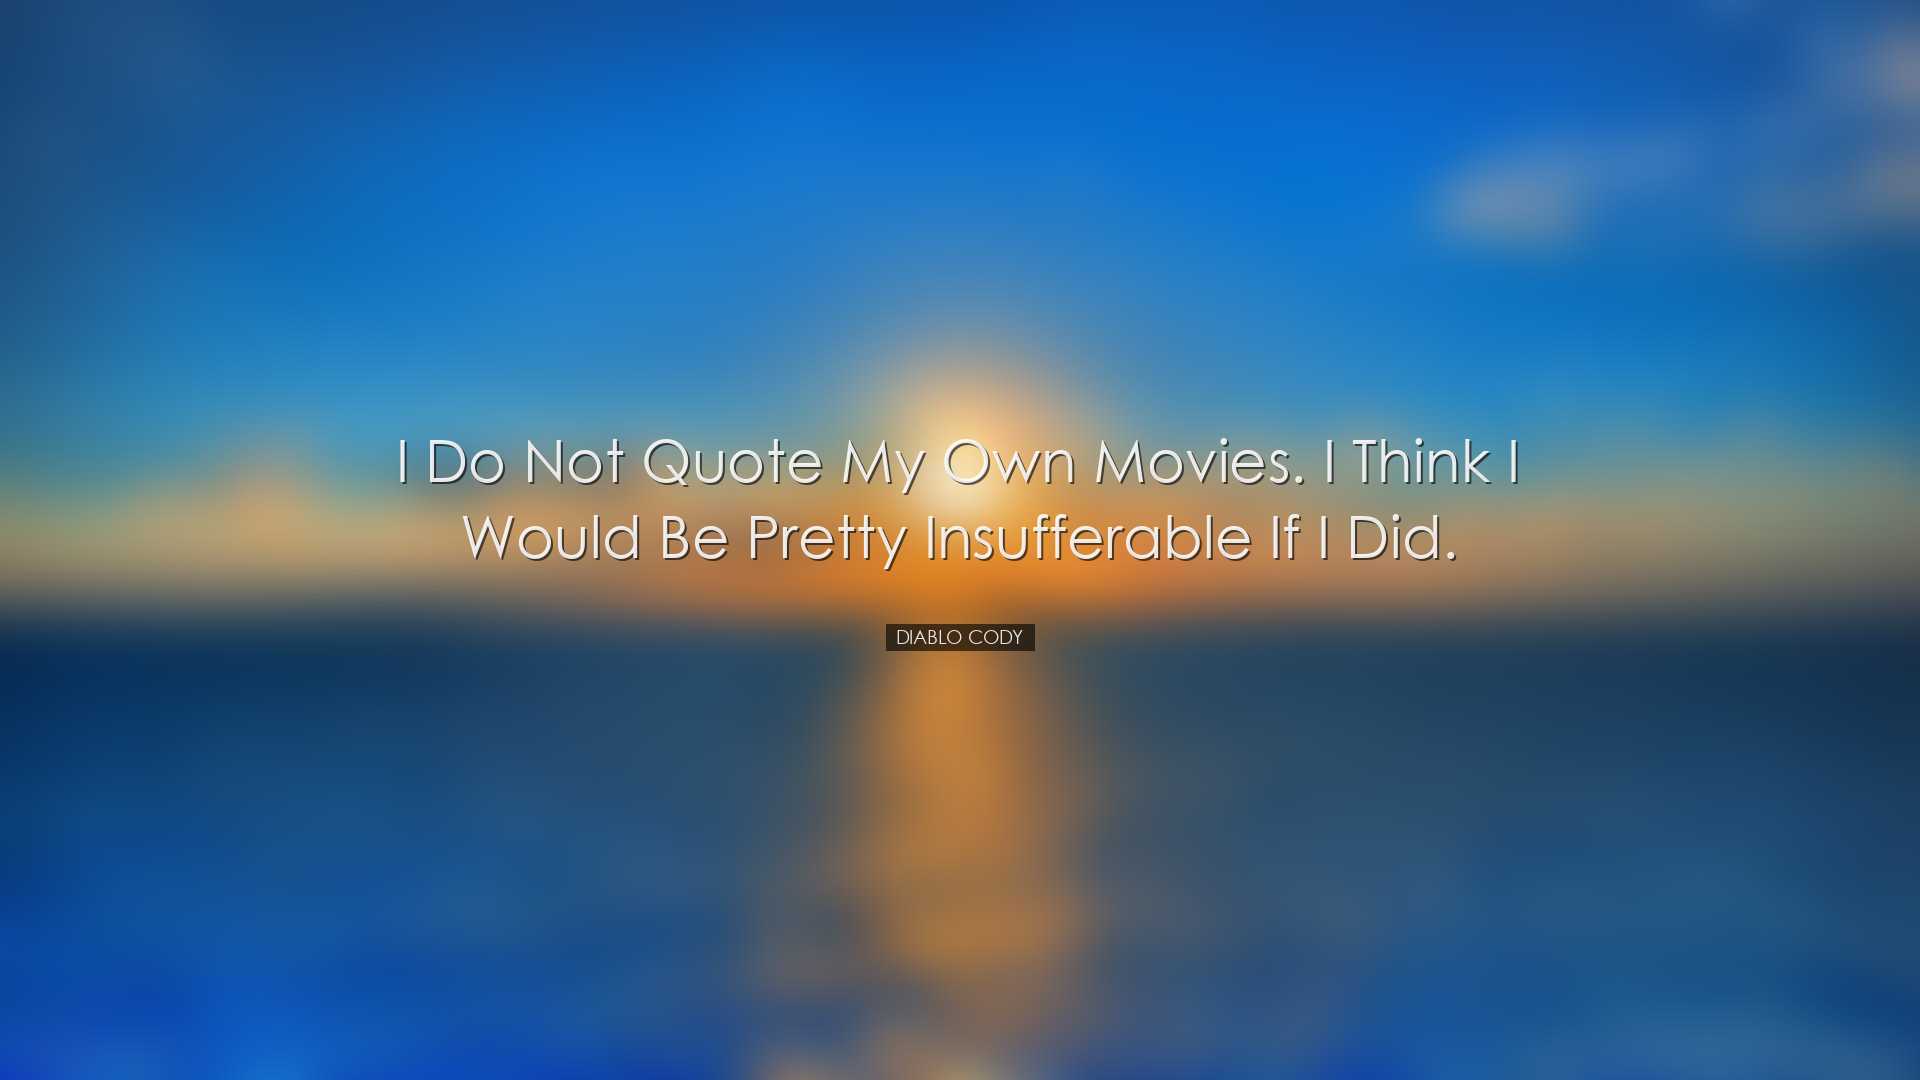 I do not quote my own movies. I think I would be pretty insufferab